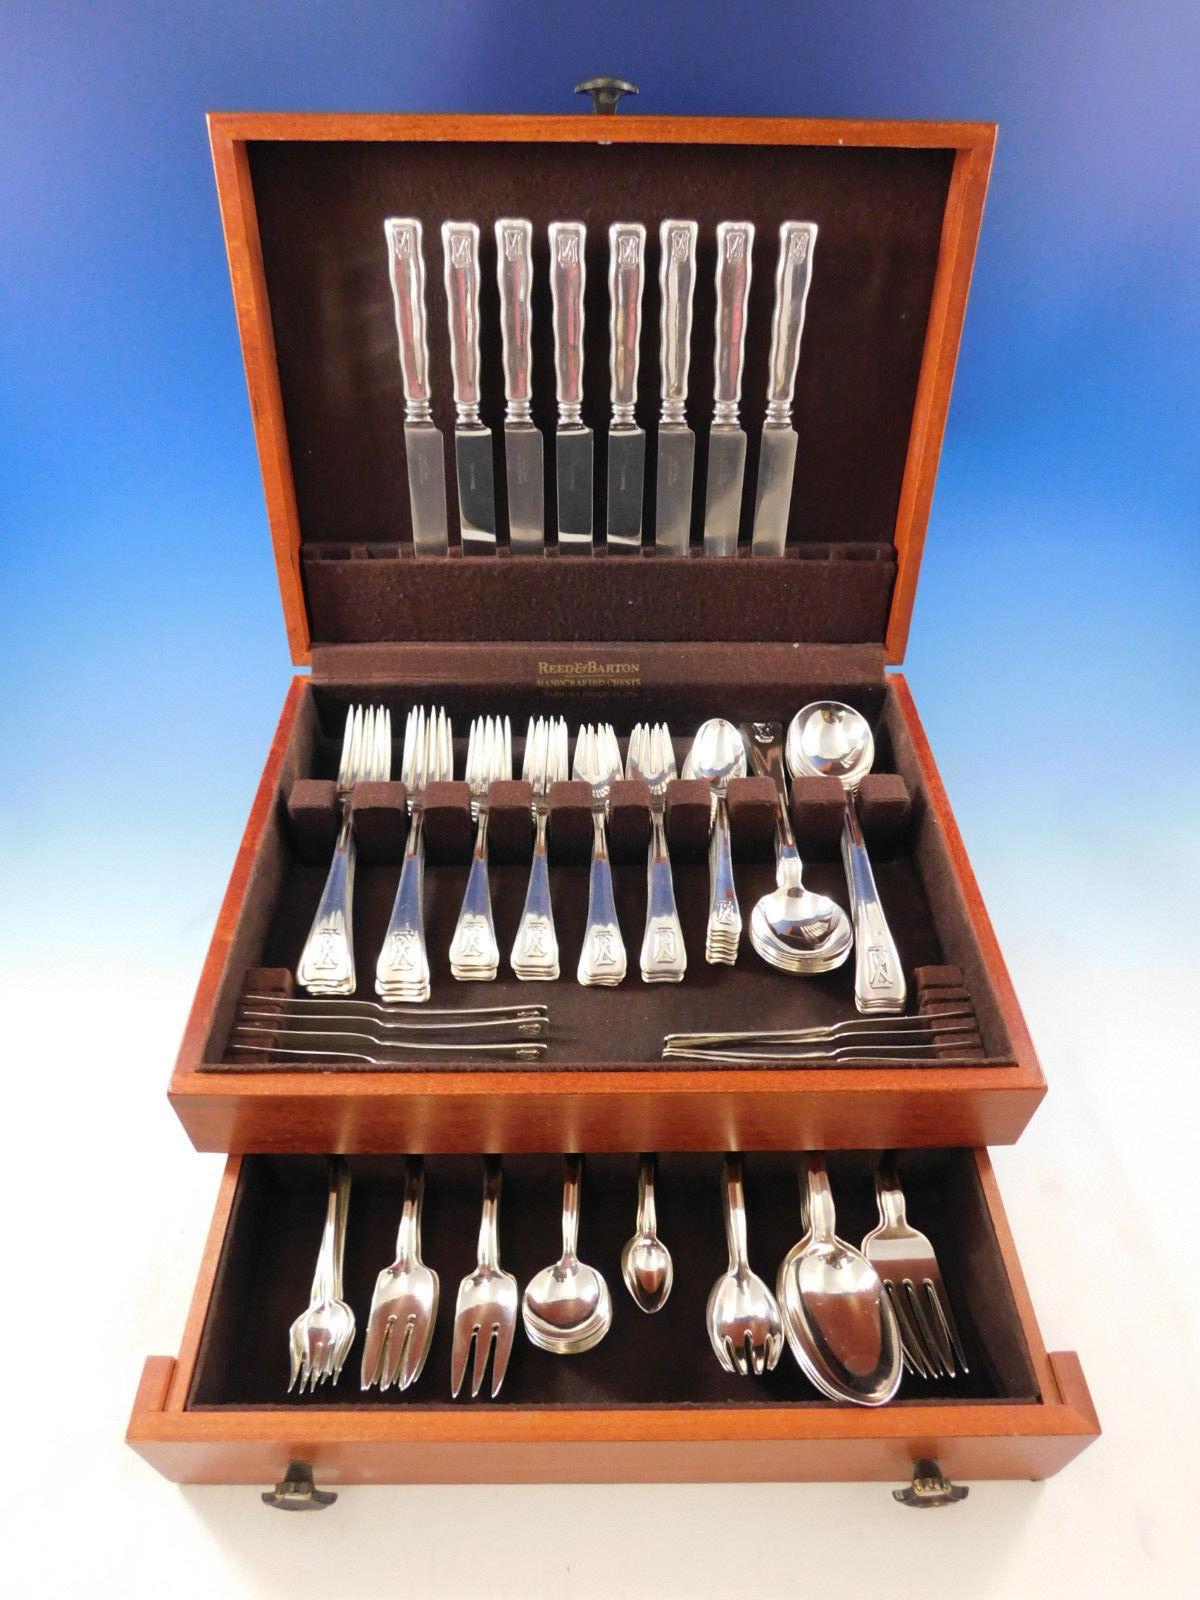 Incredible lap over edge by Tiffany & Co. sterling silver Flatware set, 112 pieces. This set includes:

8 knives, 9 1/4